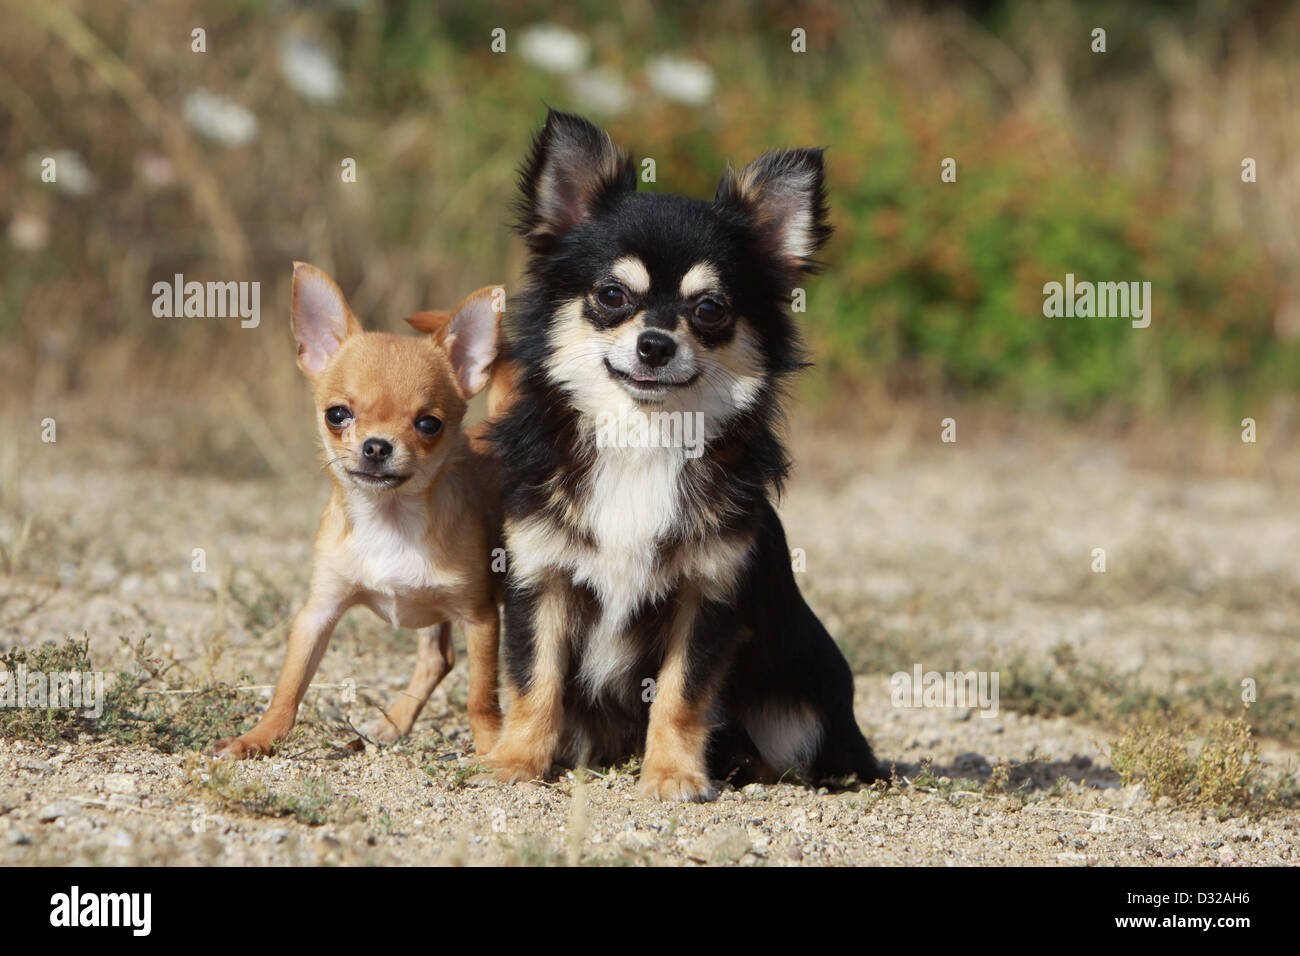 Dog Chihuahua longhair and shorthair / adult and puppy different colors  Stock Photo - Alamy